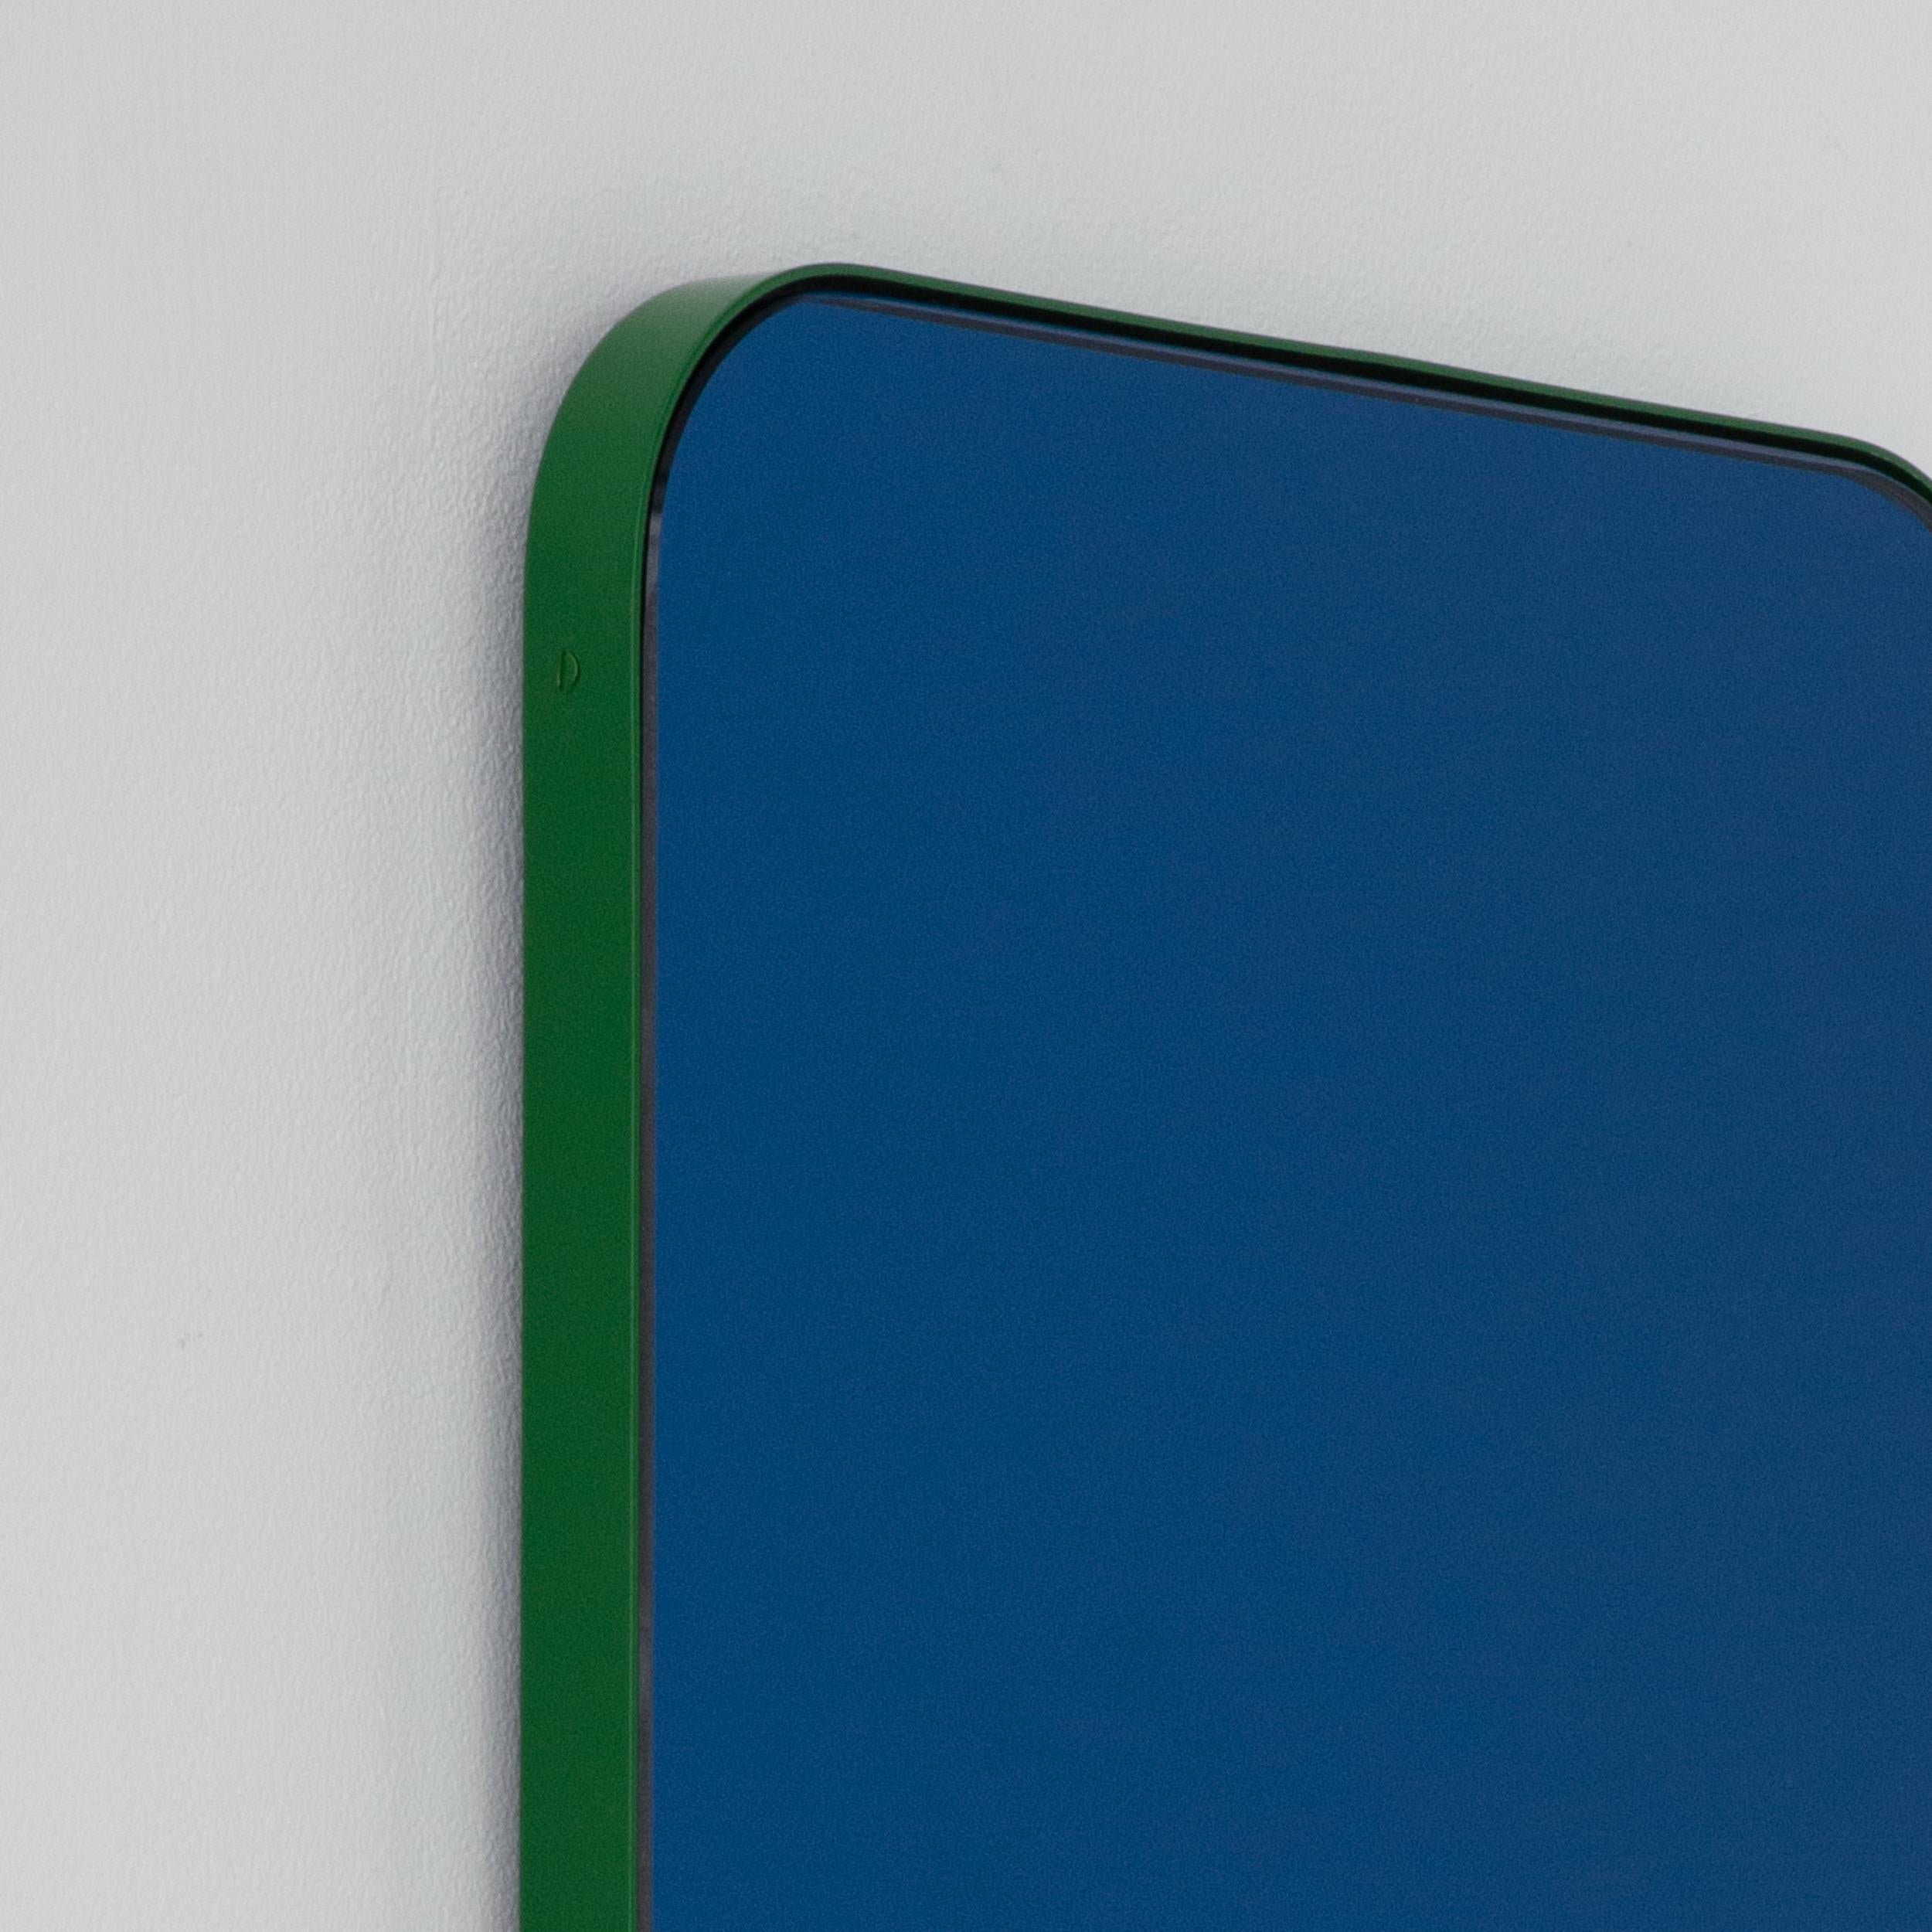 Quadris Rectangular Modern Blue Mirror with a Green Frame, Small In New Condition For Sale In London, GB